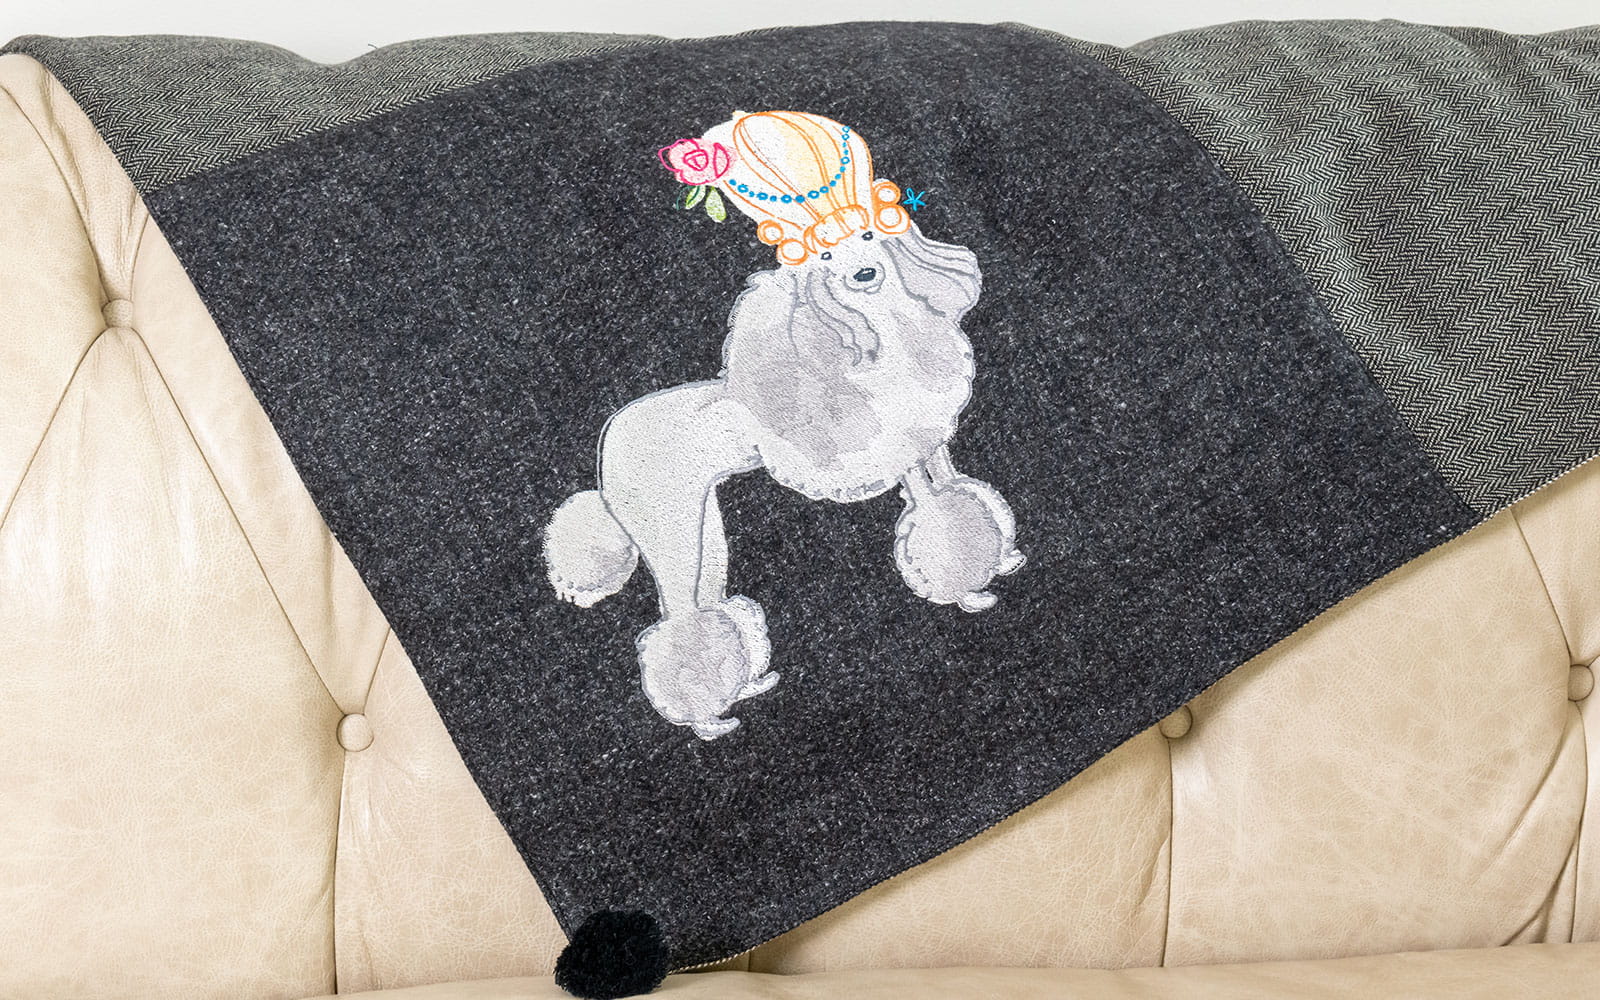 embroidered white cartoon poodle on beige sofa